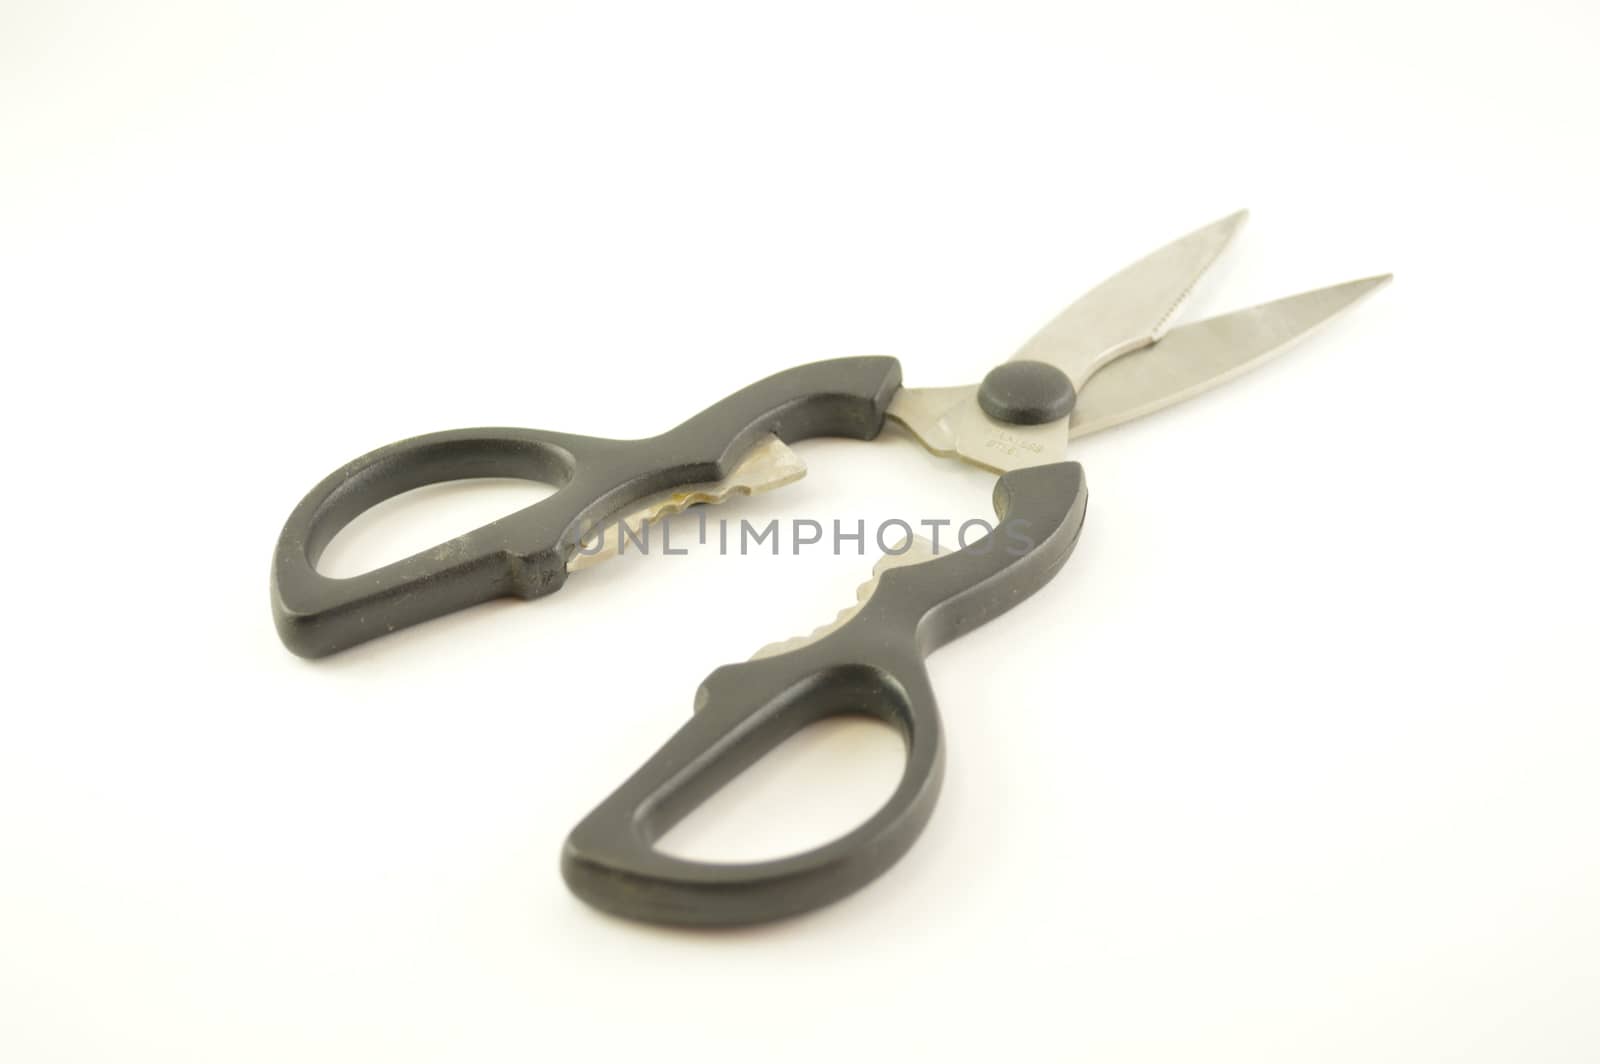 Shears for poultry isolated on white background